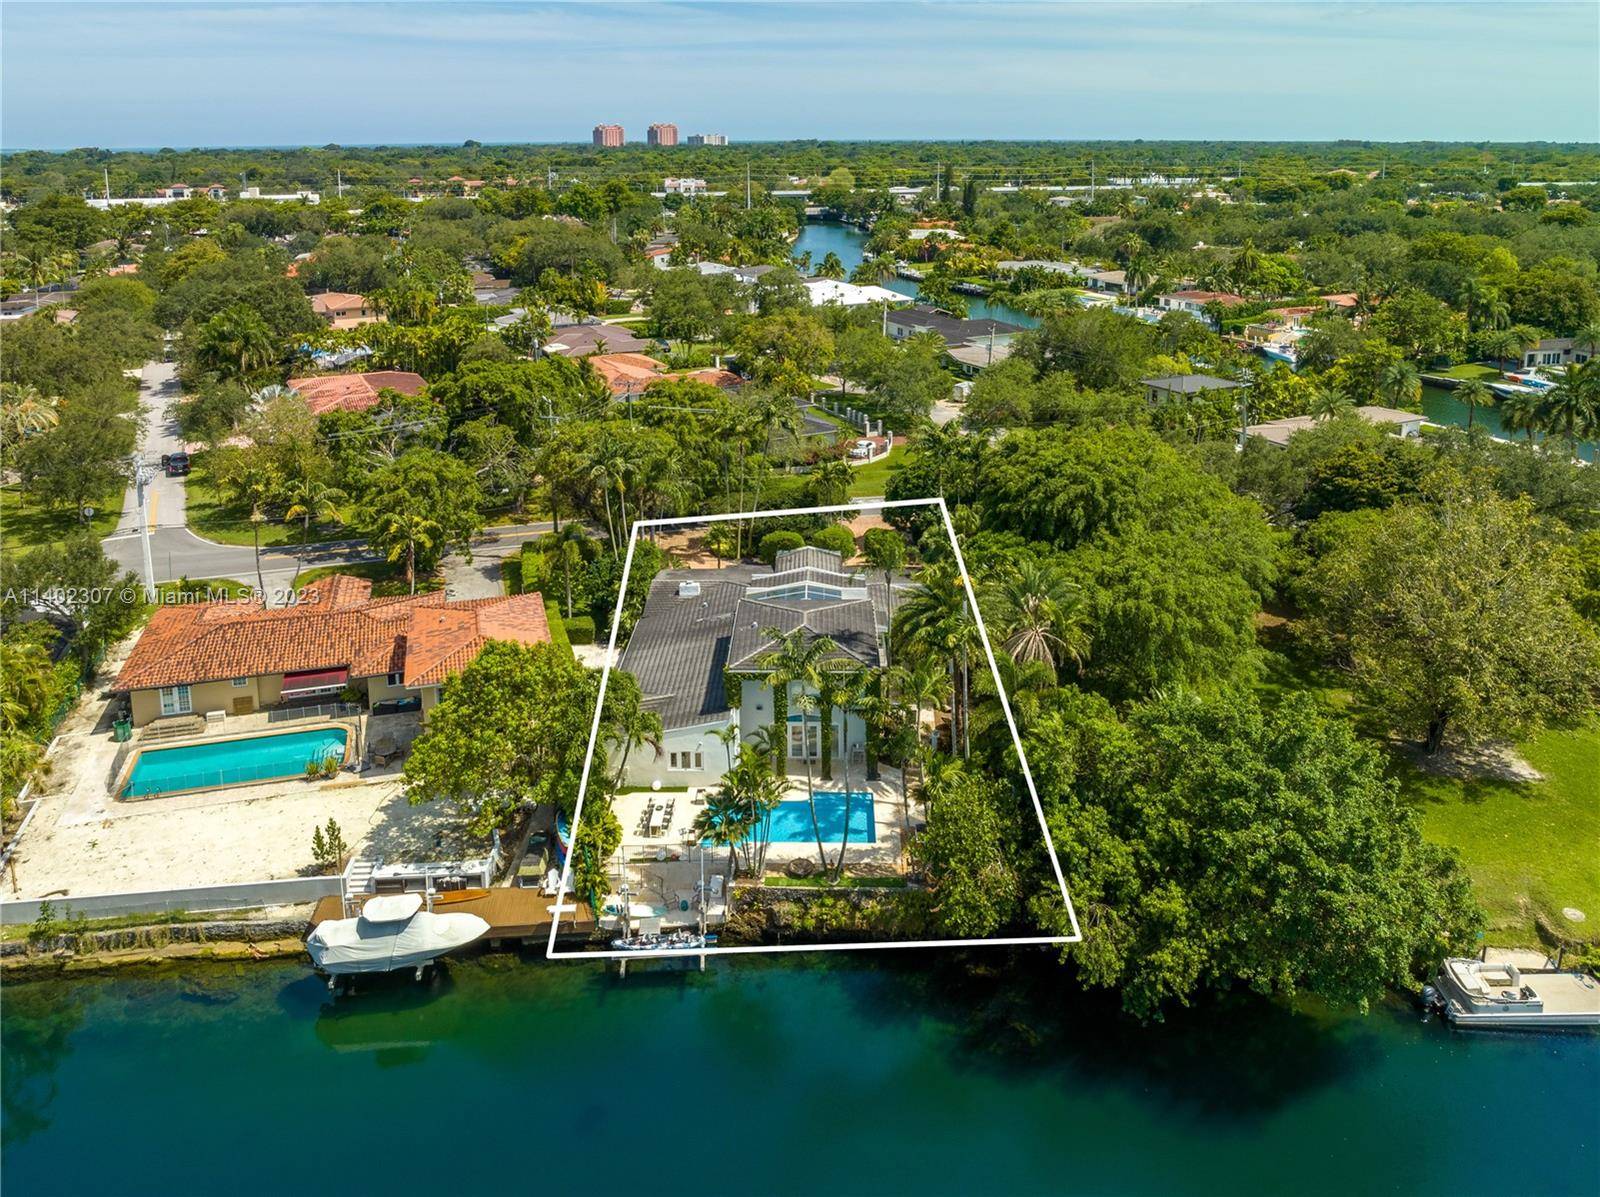 Spectacular 5, 681 SF contemporary home on the Coral Gables Waterway, with 5 bedrooms and 5.